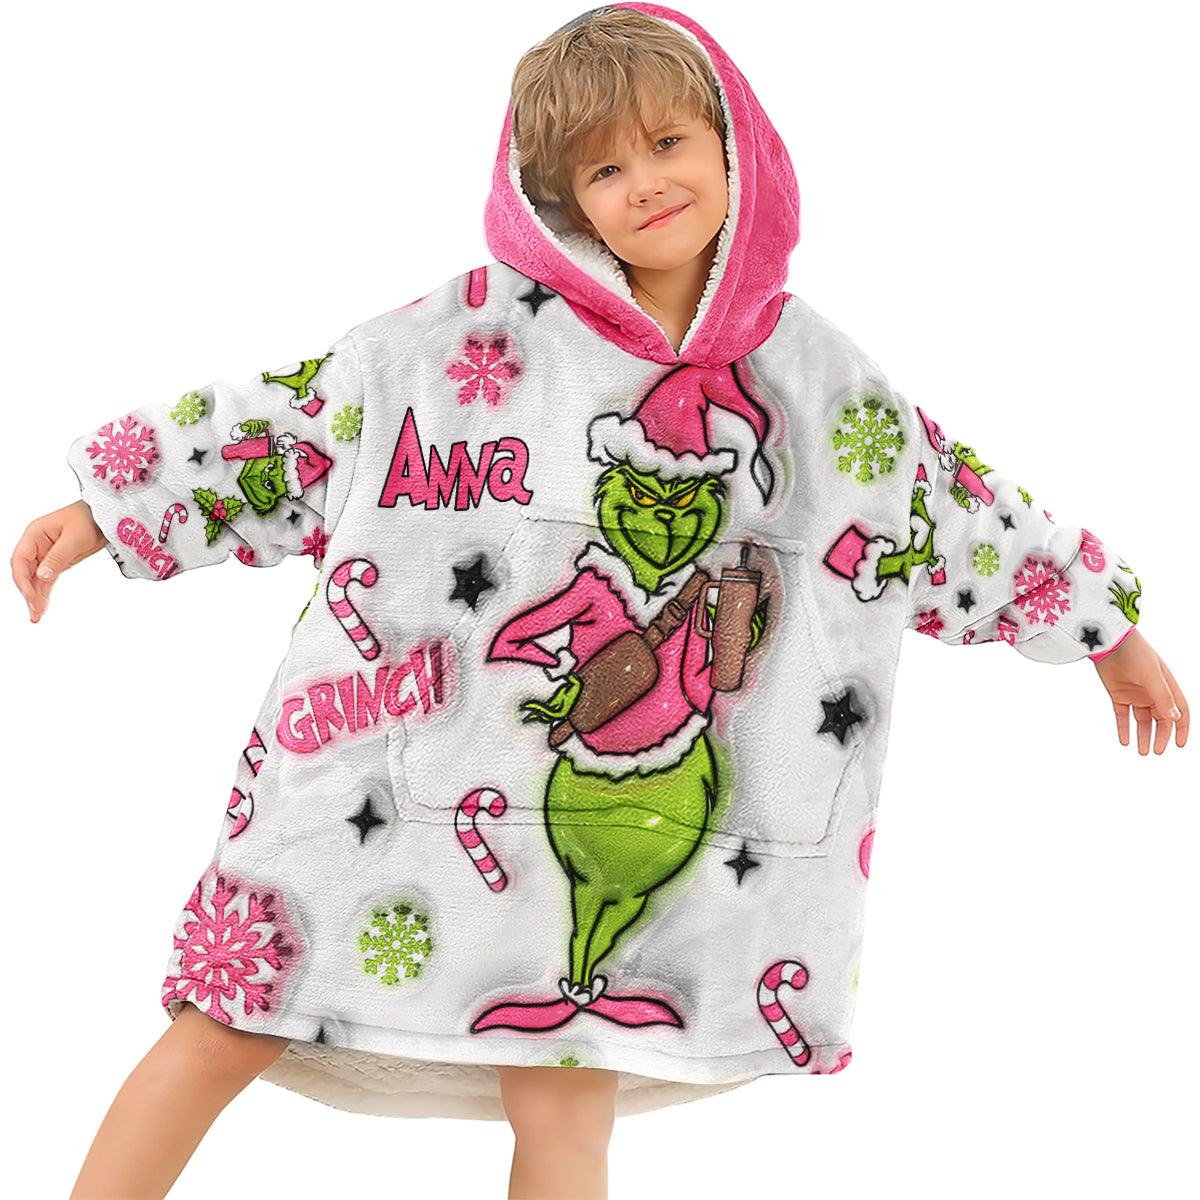 I'm Booked - Personalized Stole Christmas Blanket Hoodie